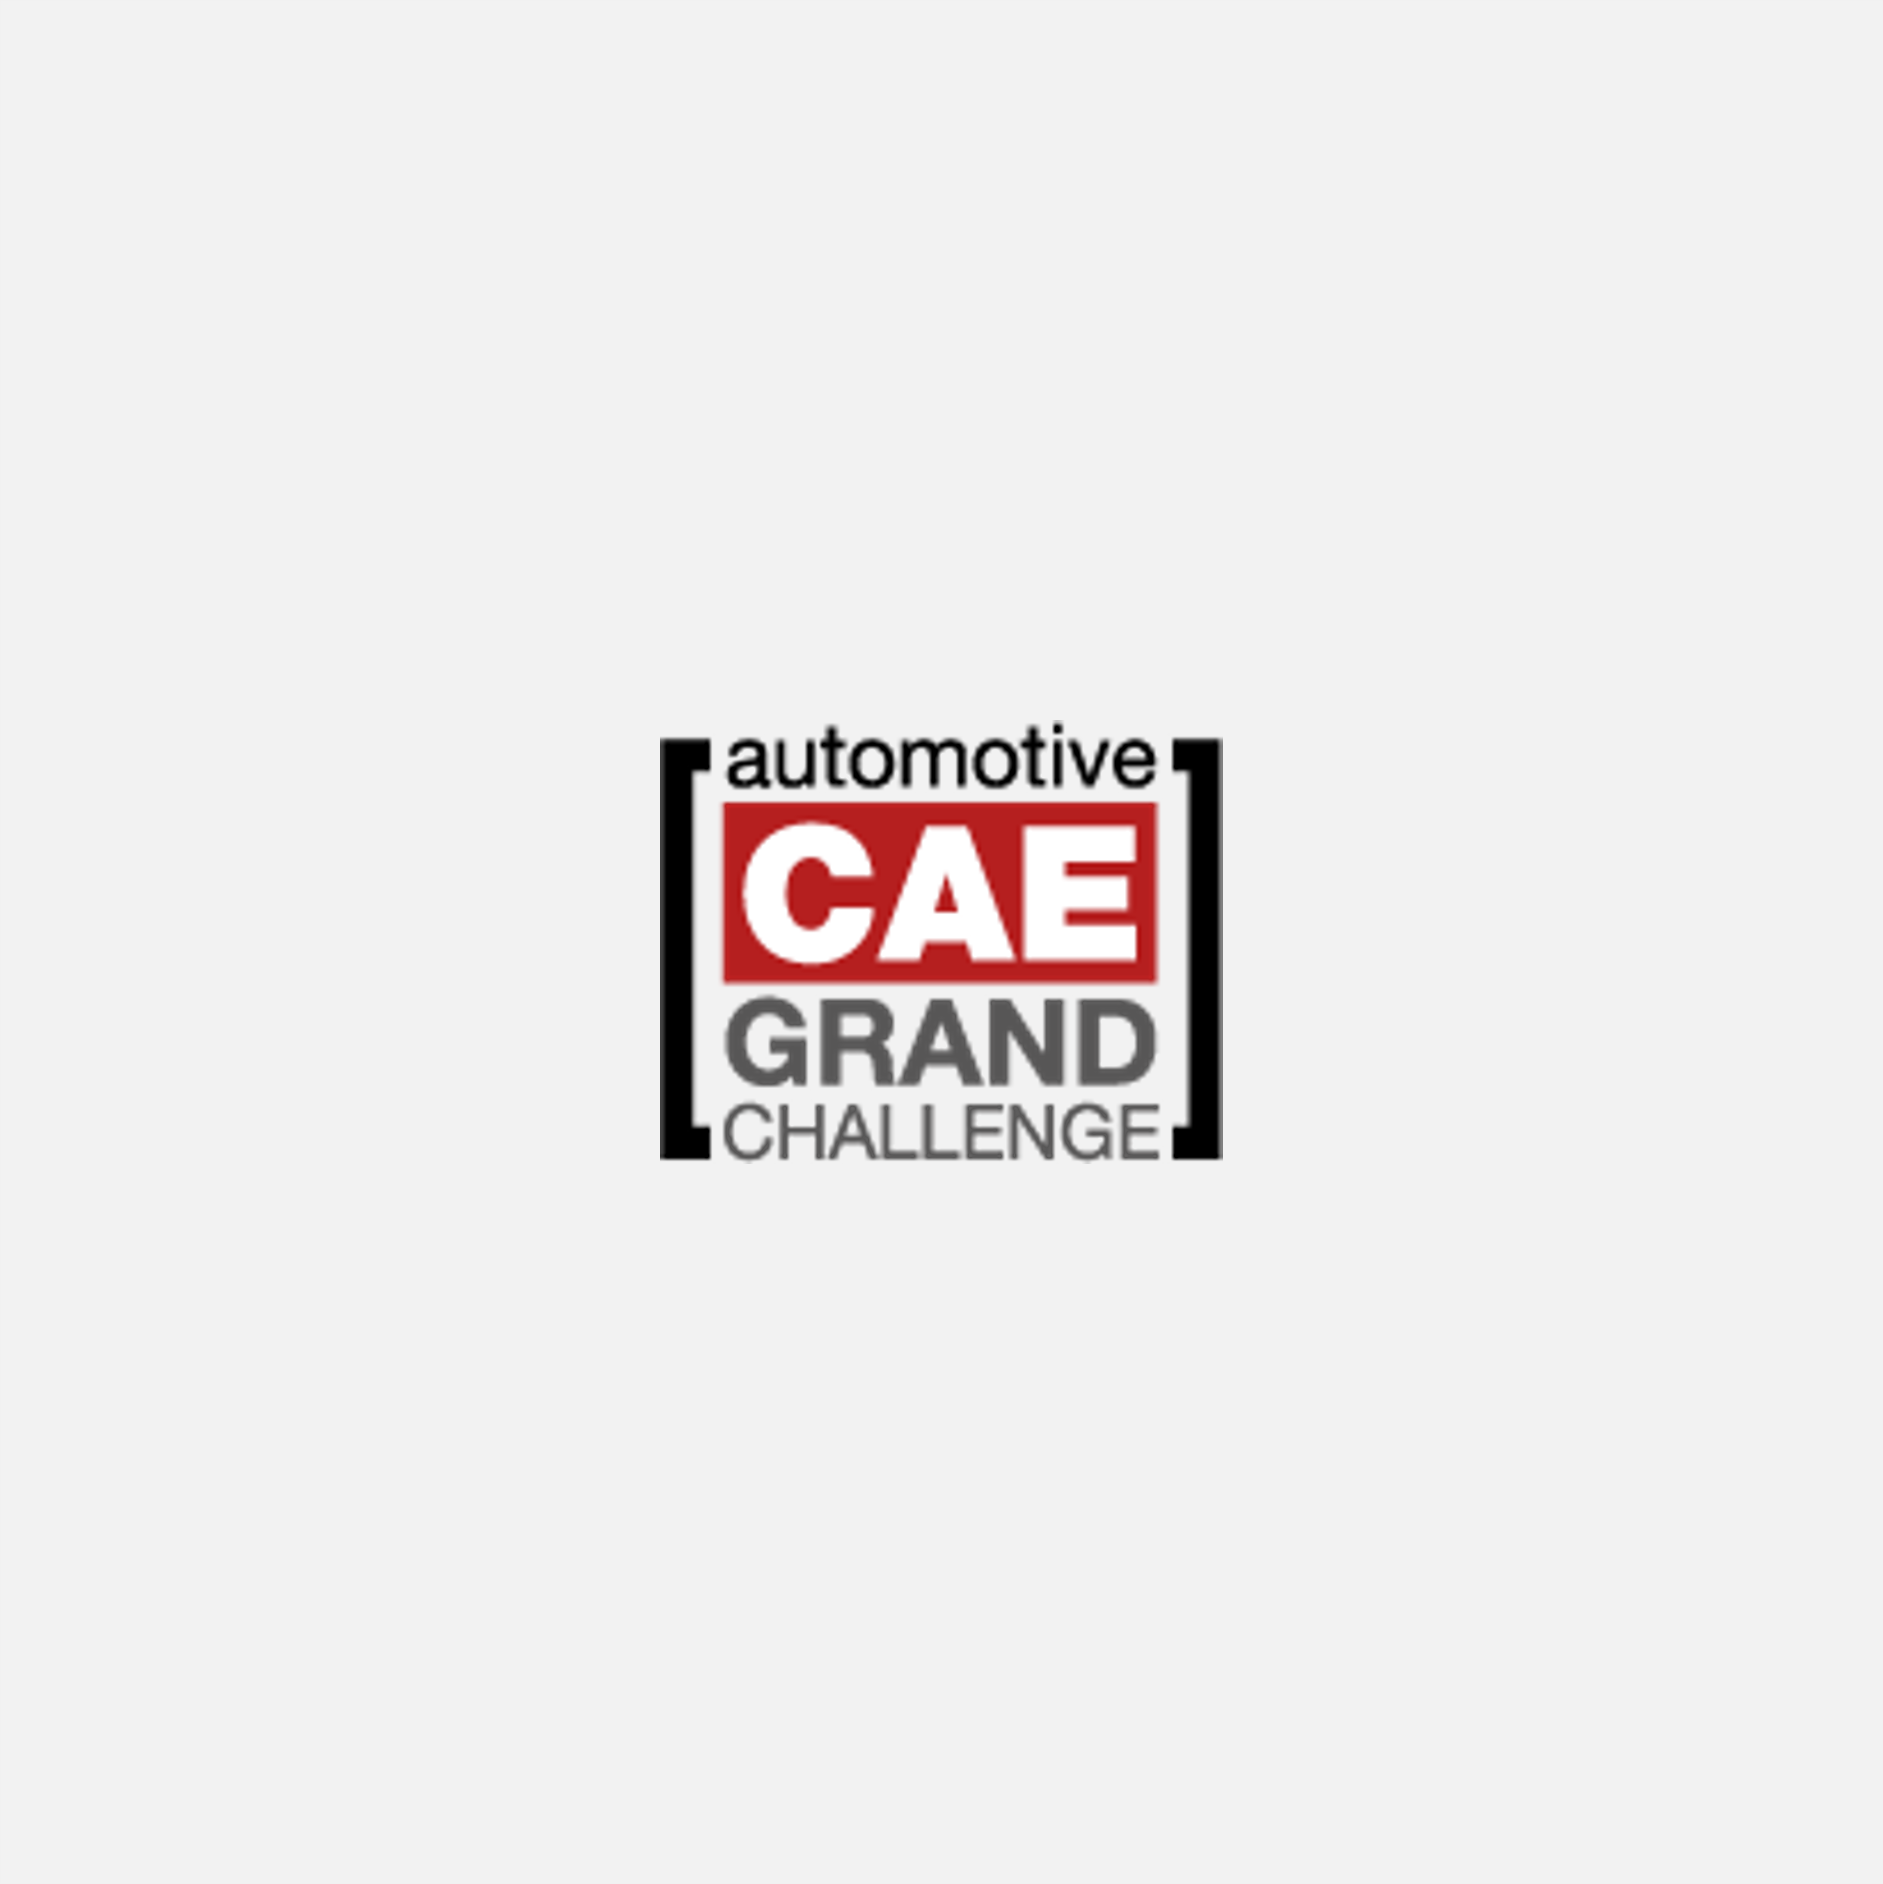 Conference logo of the automotive CAE Grand Challenge